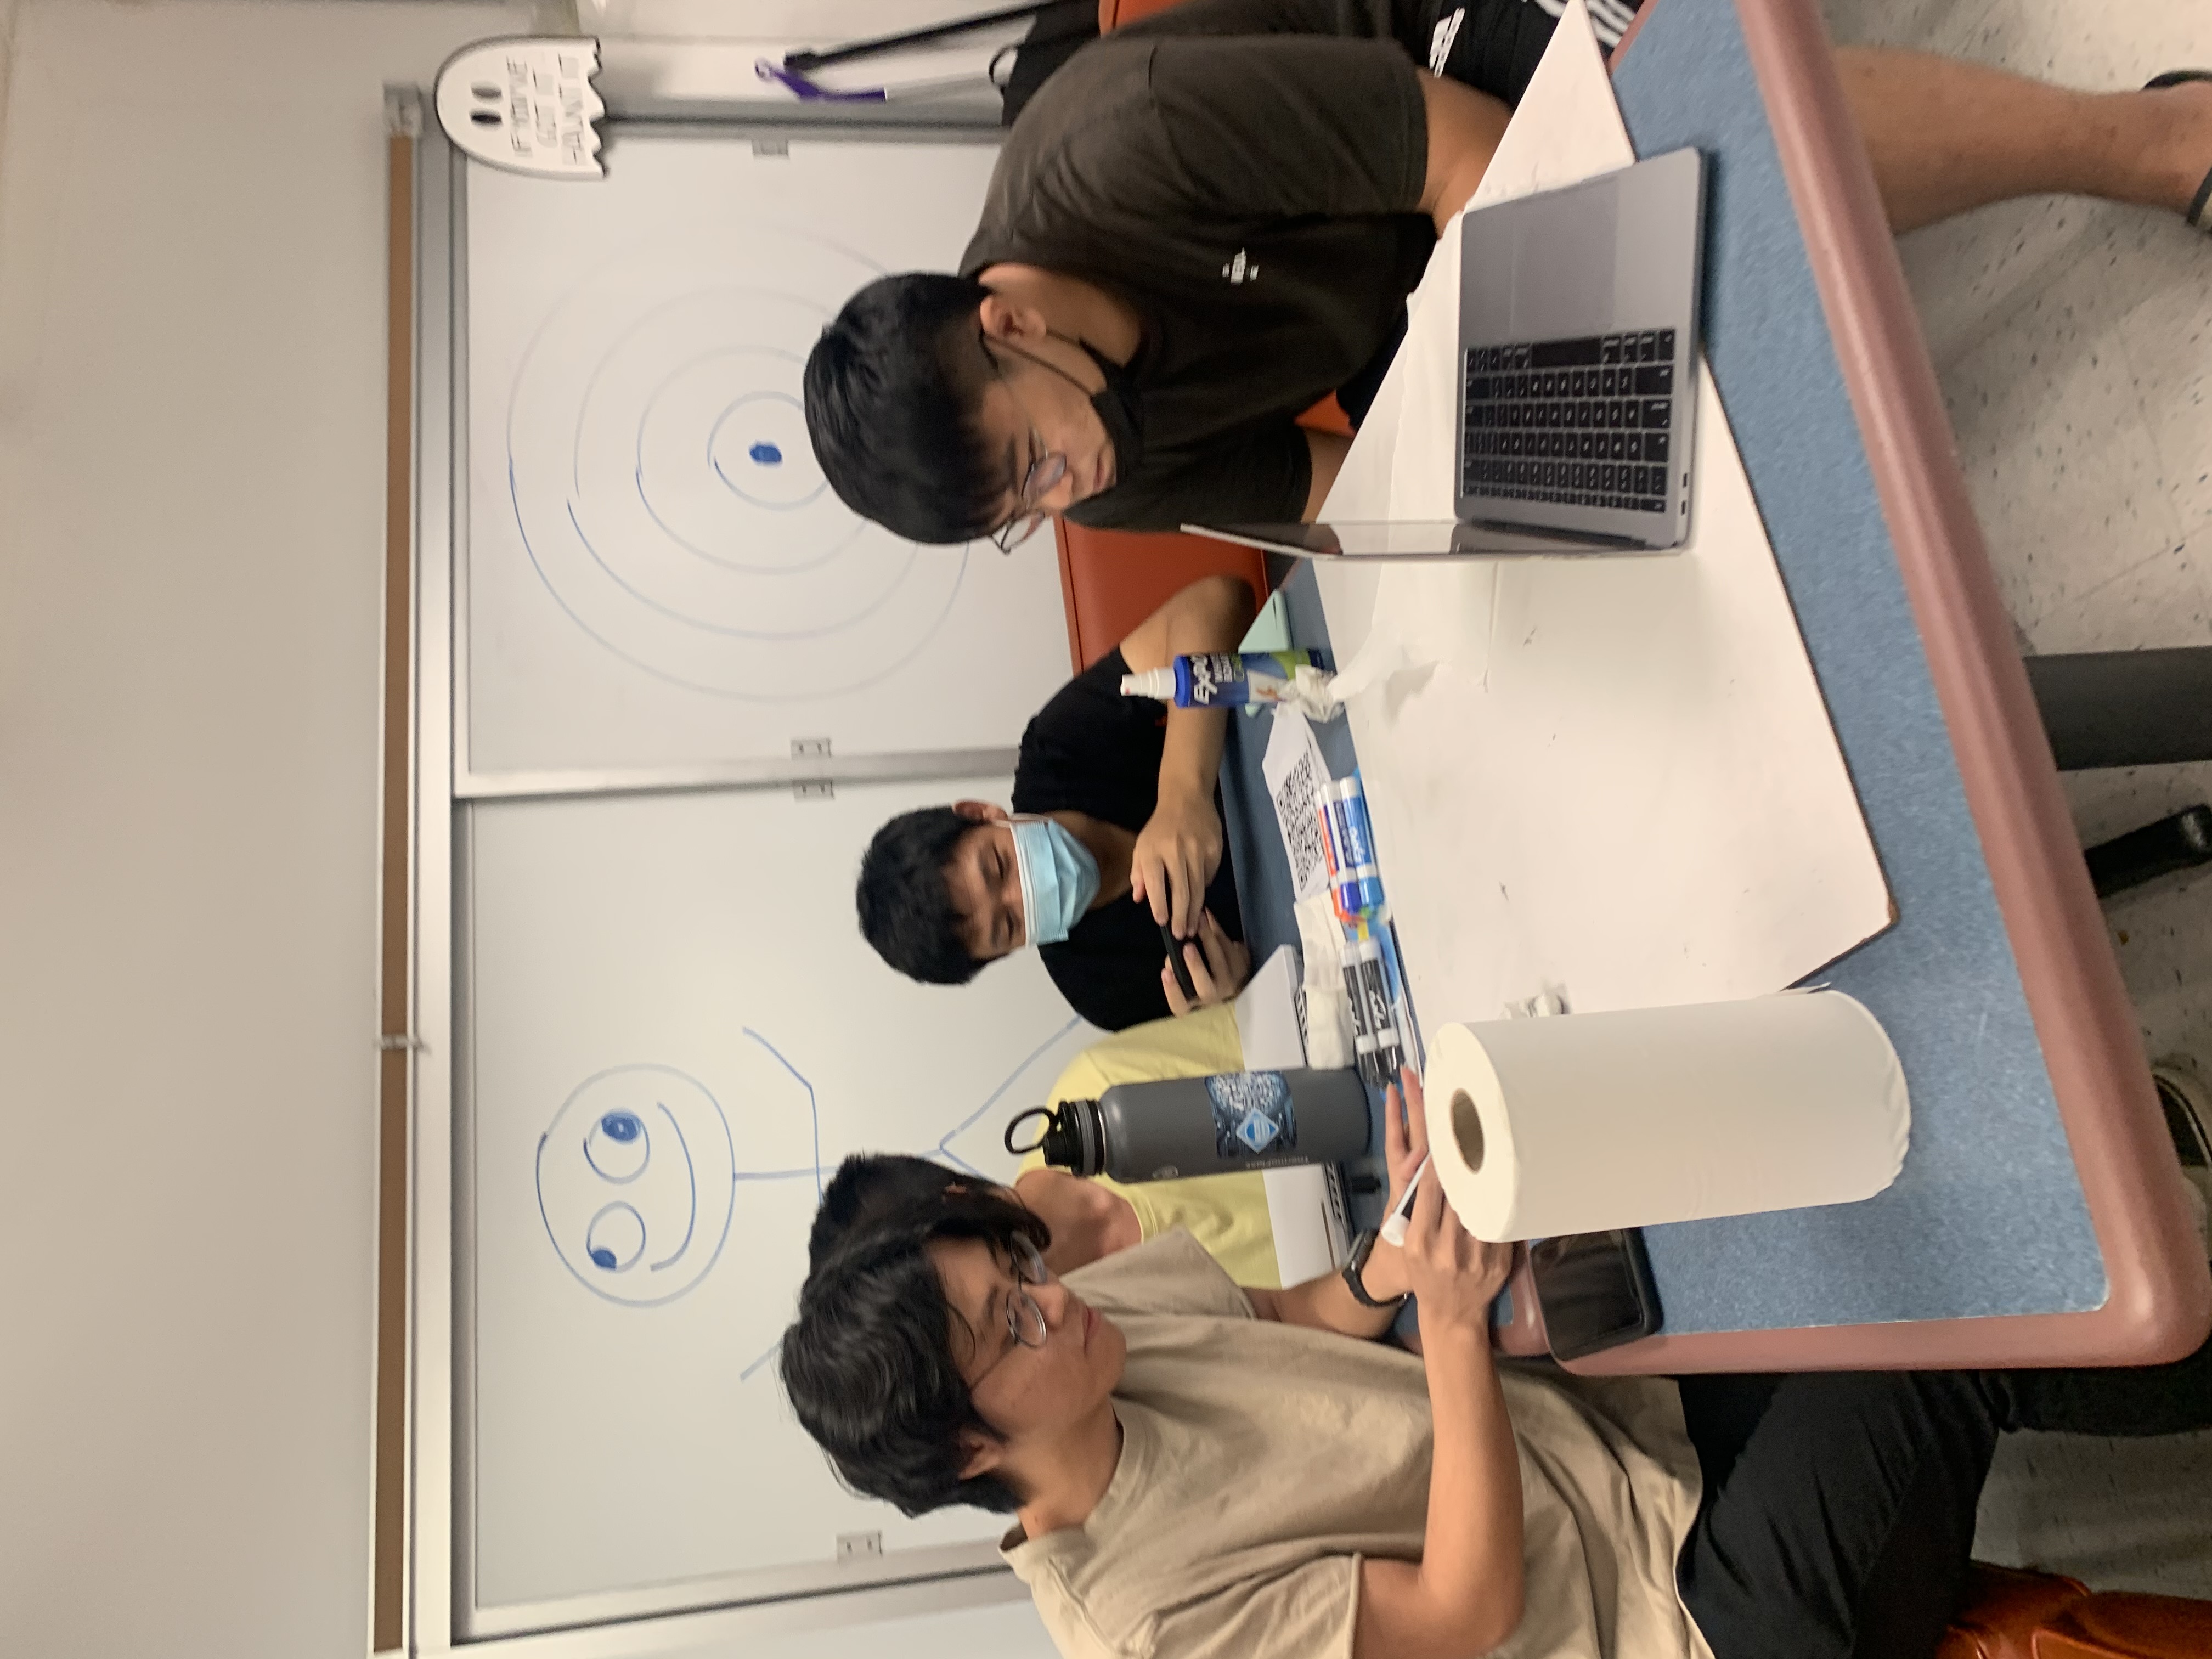 A group of 4 students working on something together